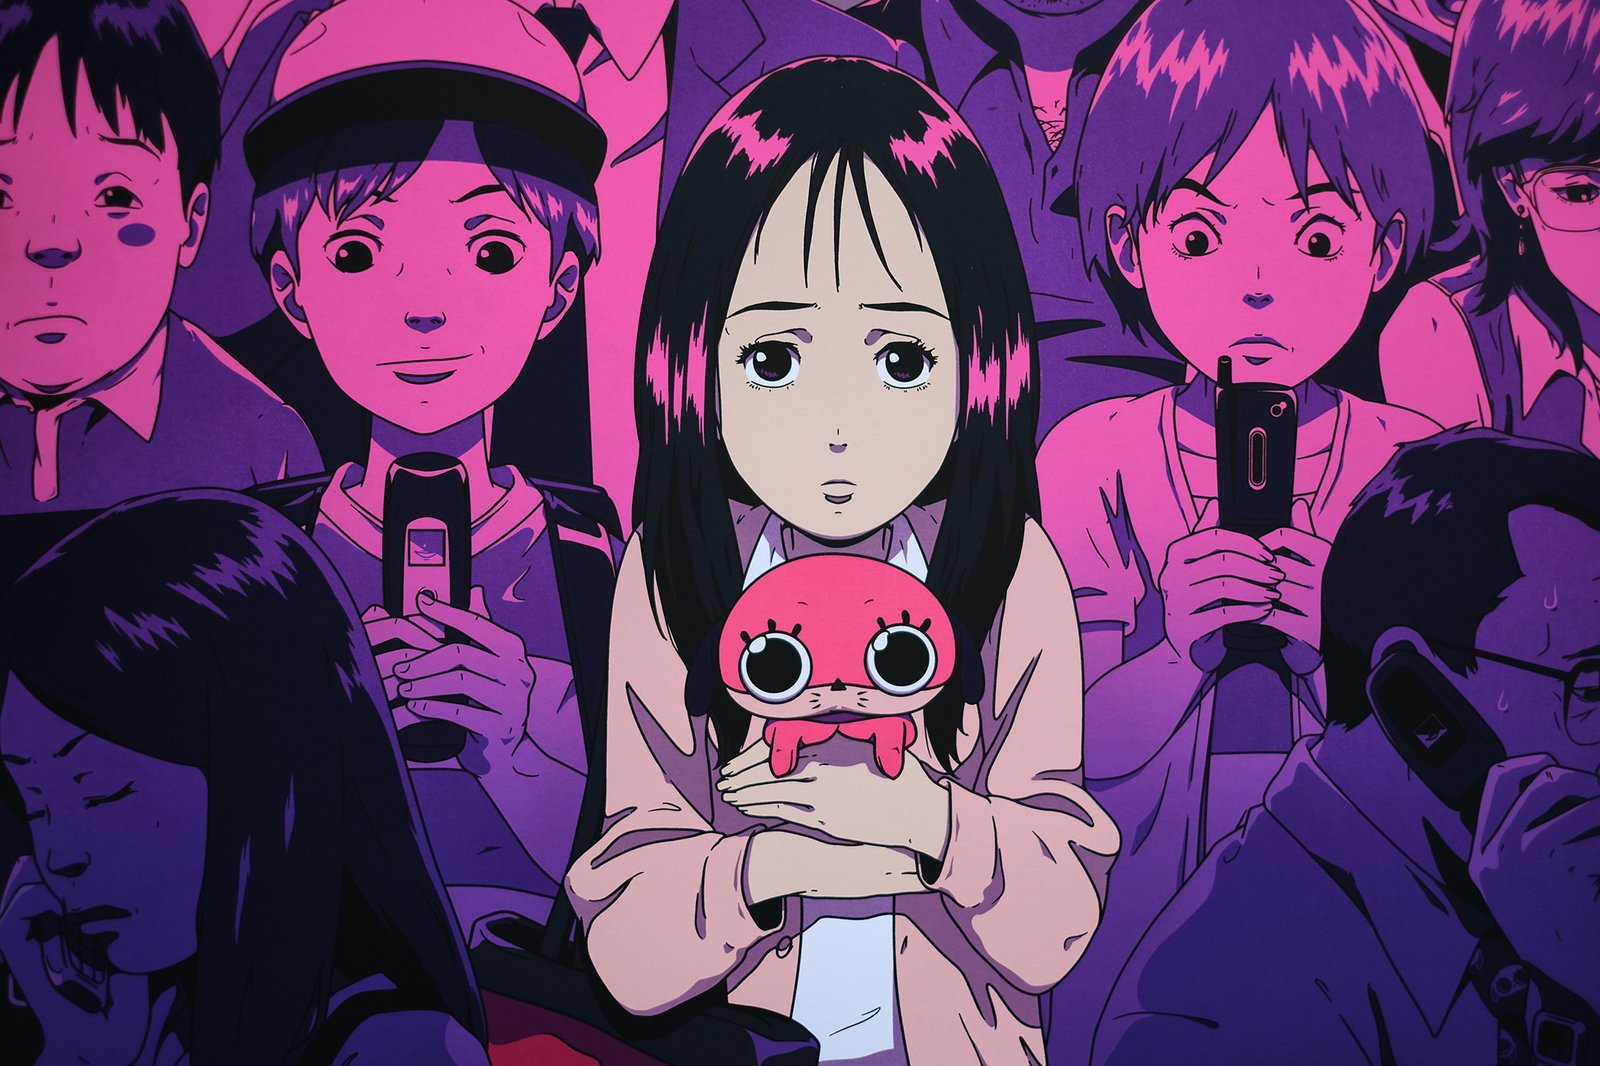 What are some anime like Paranoia agent? - Quora